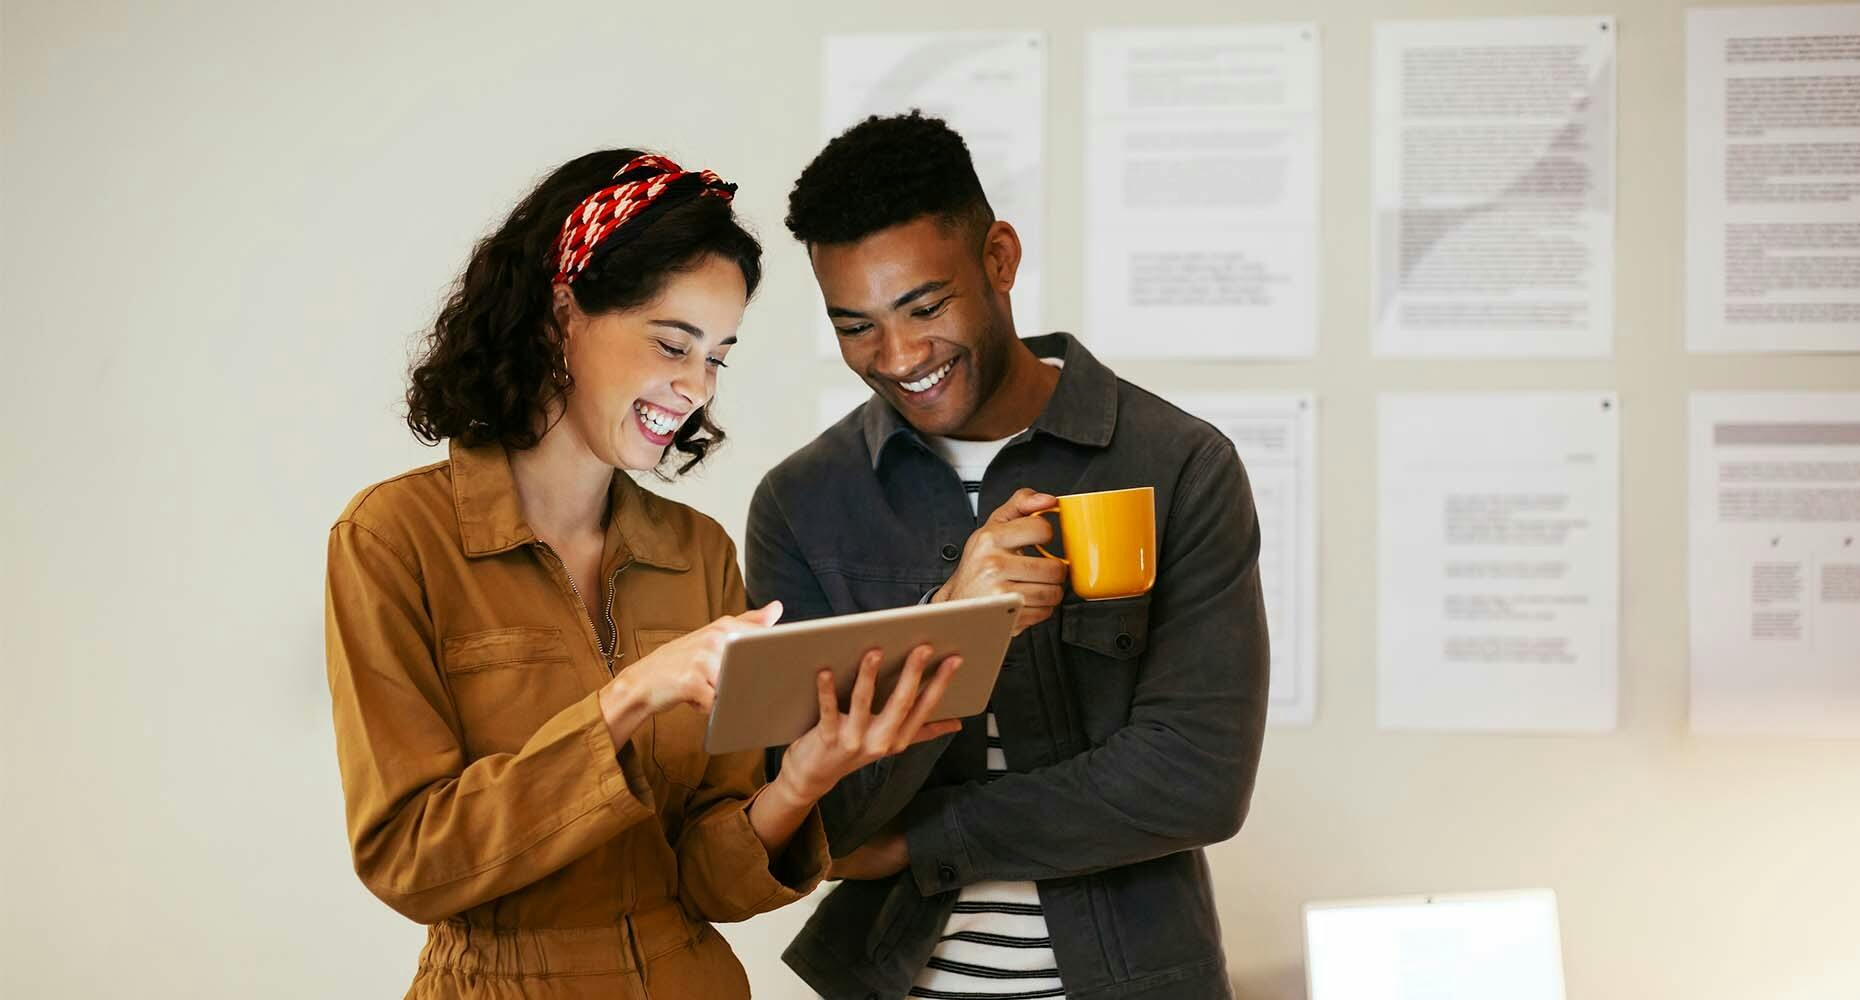 Man and woman collaborating on a tablet